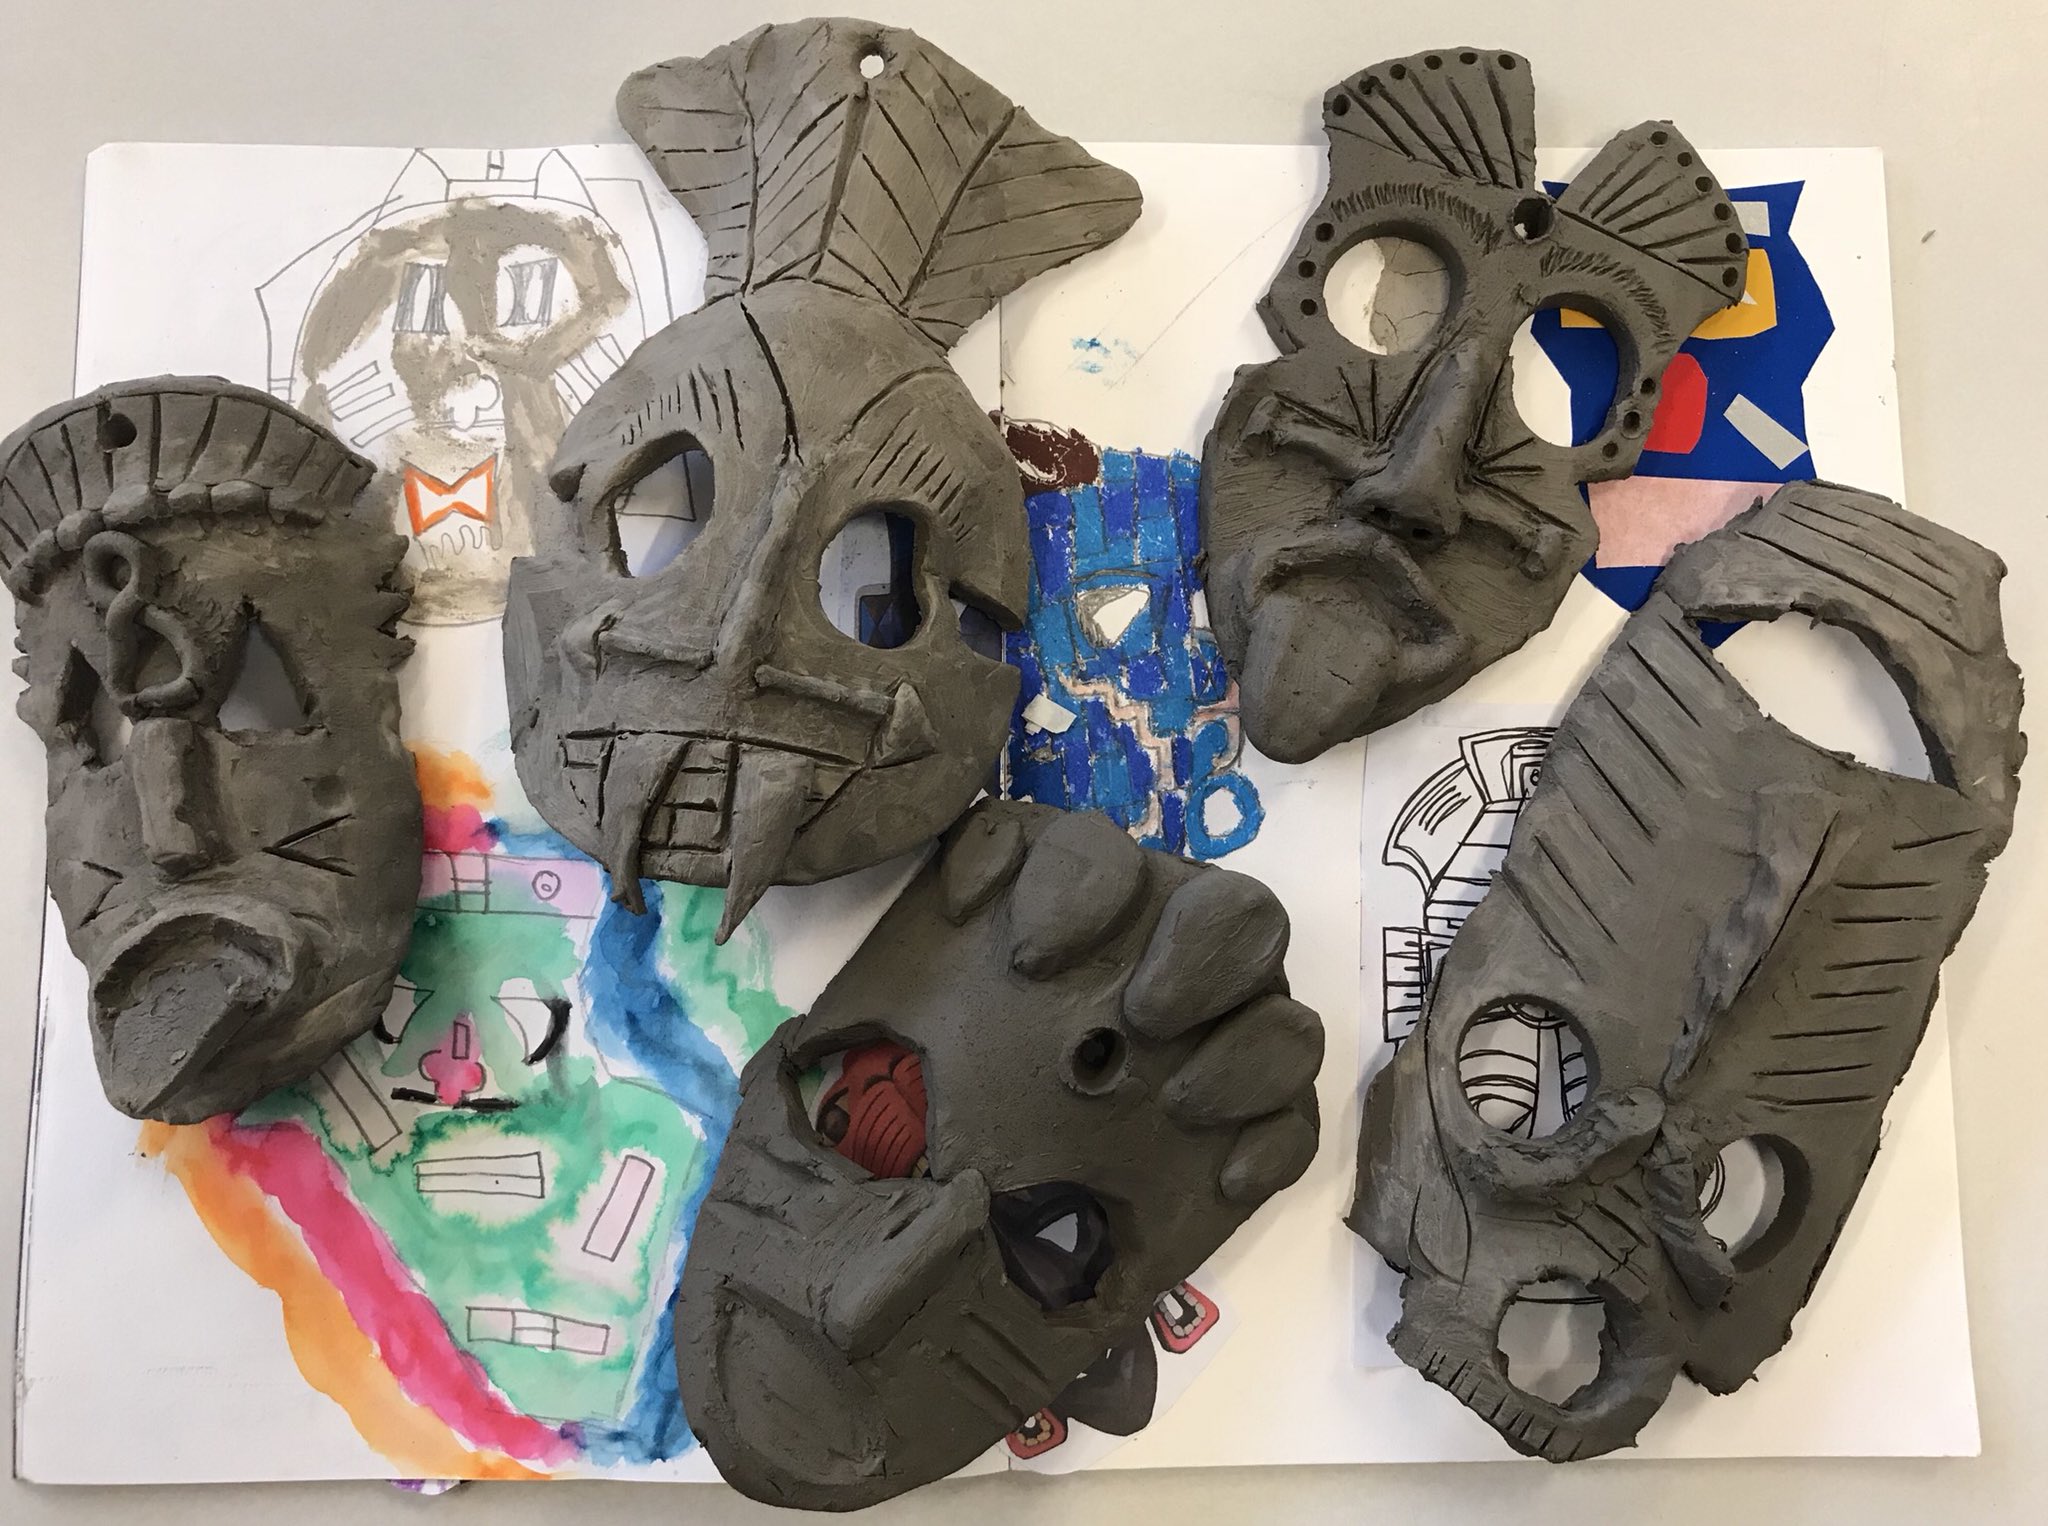 Gomersal Primary Art on Twitter: "Y6 have and created their own clay mask inspired by the Ancient Maya civilisation. Do you think these would make good: death, event or battle masks? #